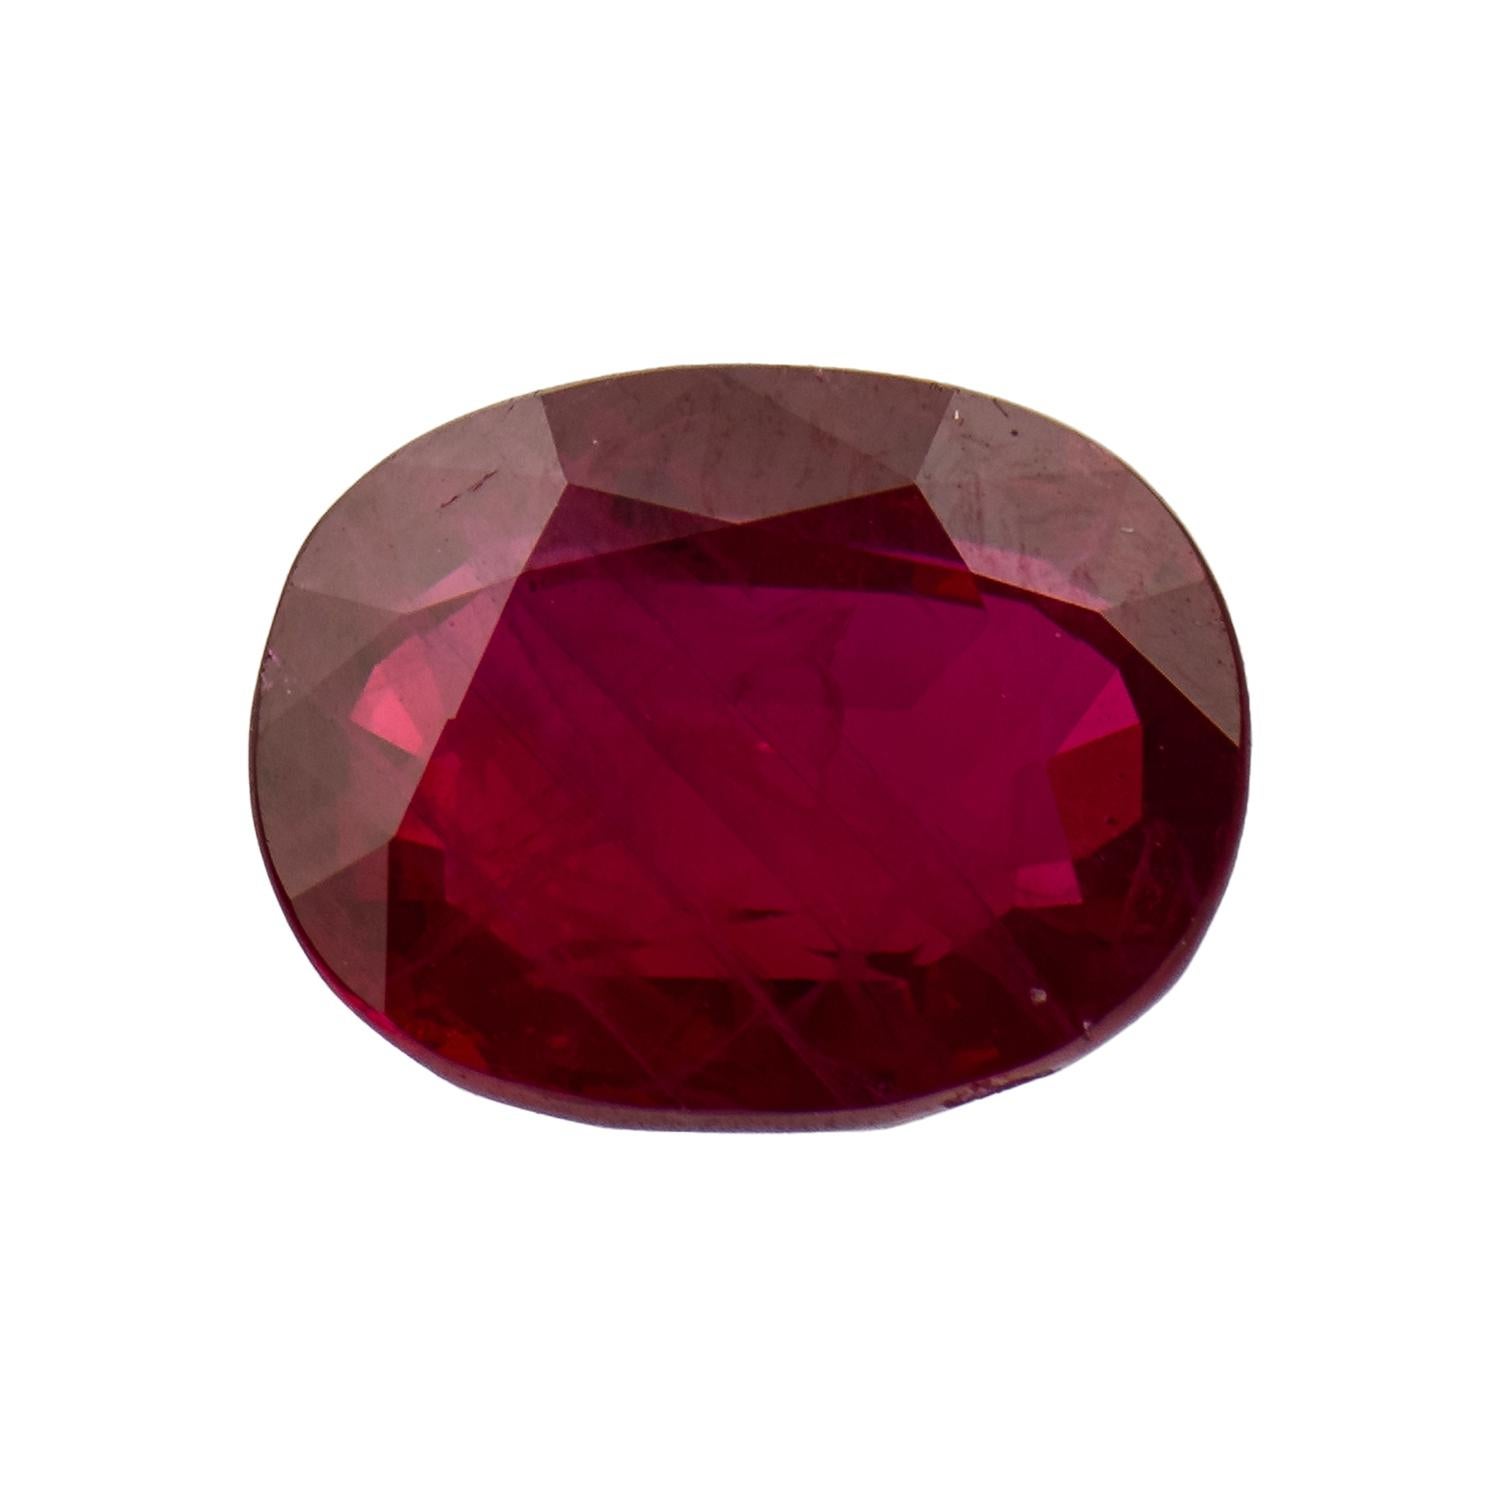 Certified Natural Burmese Ruby Oval Cut Loose Gemstone for Rings 
Color : Deep Red
Transparency : Transparent
Shape and Cut : Oval Faceted Cut
Weight : 4,06 Ct's
Measurements : 9,99 x 7,80 x 4,73 mm

Note for the Buyers : Black background enables